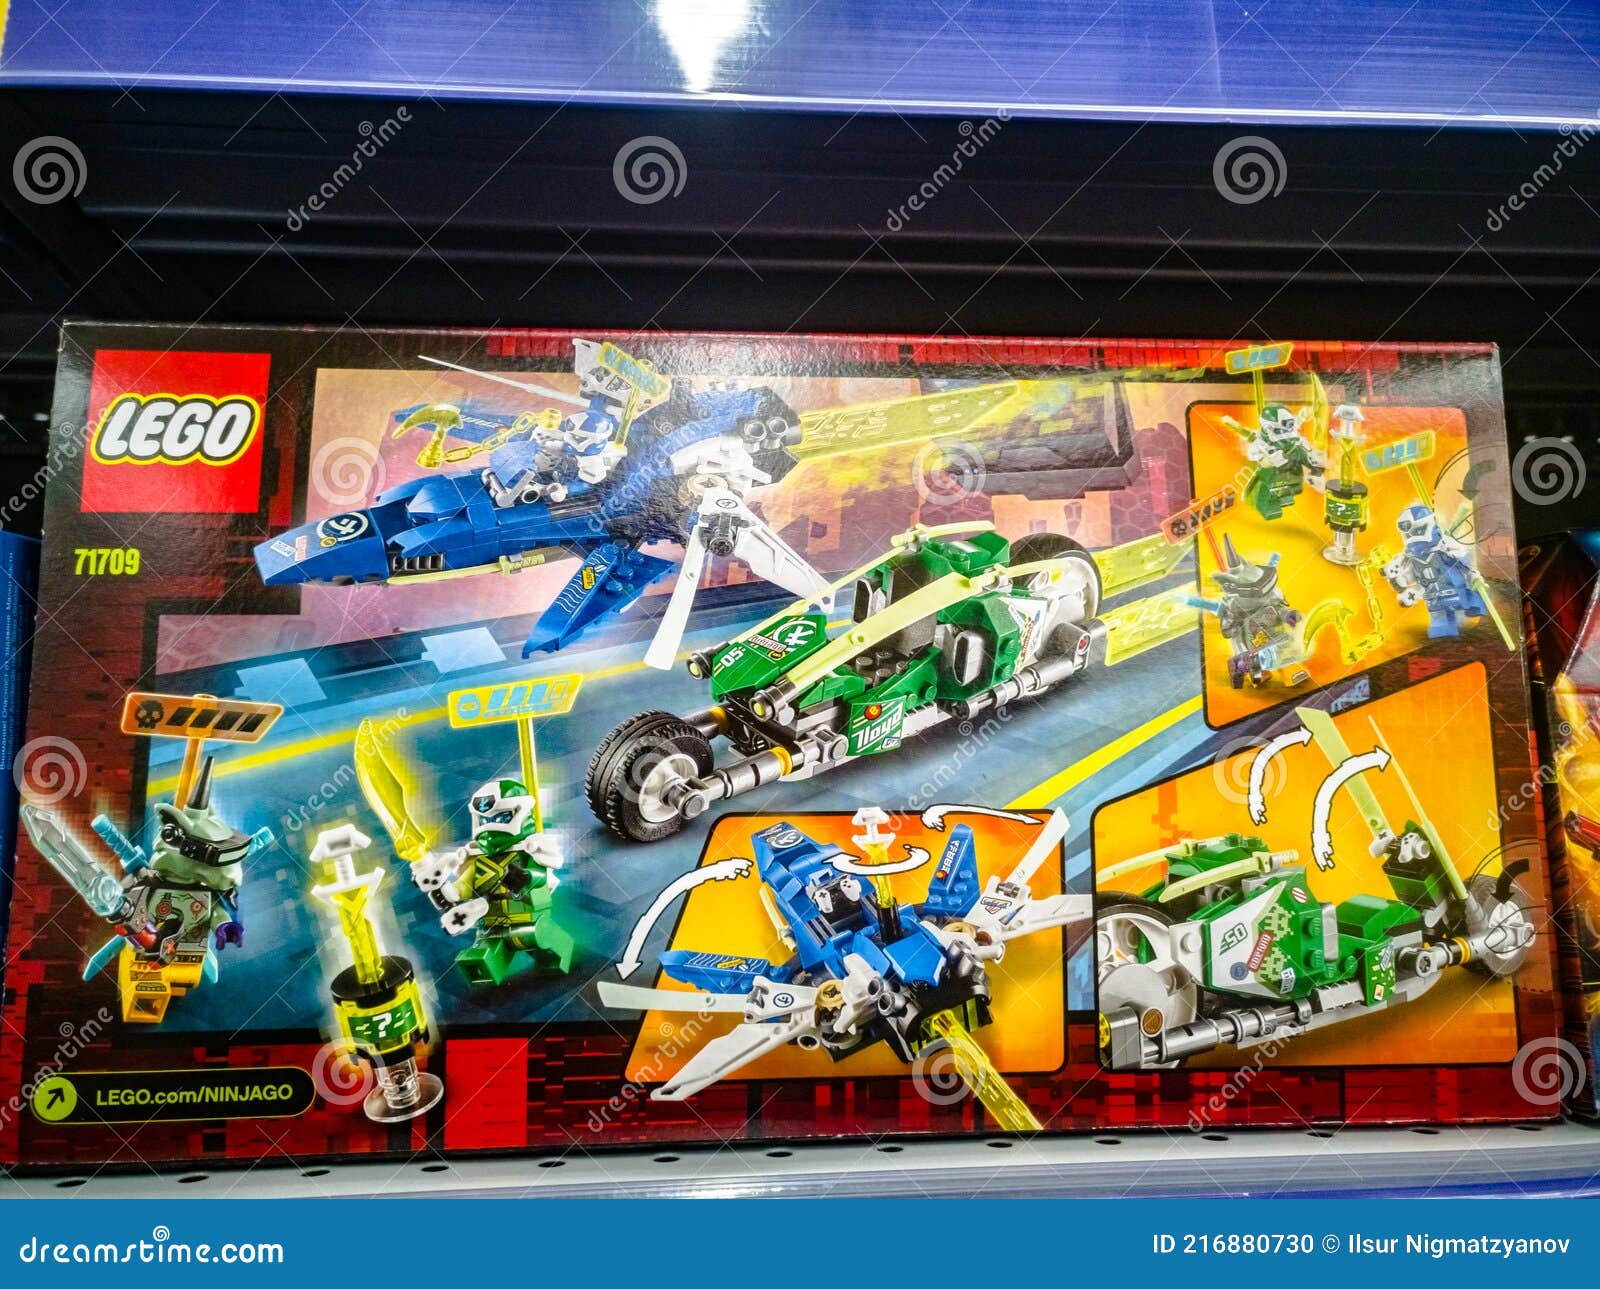 Construction Set LEGO Ninjago 71709 Jay and Lloyd S High-speed Cars on Sale  in the Hypermarket 11.04 Editorial Image - Image of color, sale: 216880730